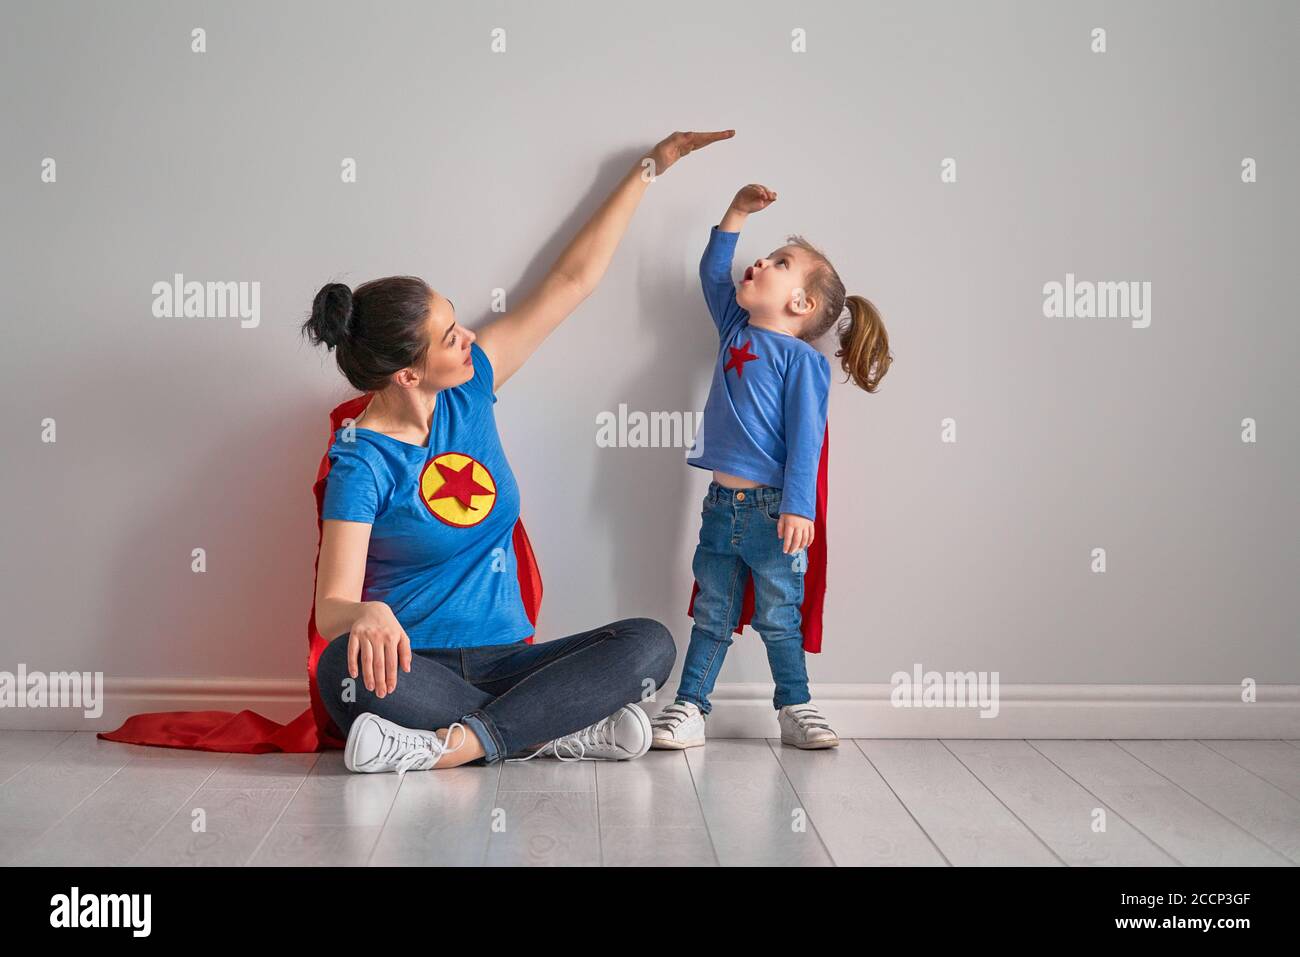 Mother is measuring growth of child daughter near empty wall. Girl in superhero costume. Stock Photo